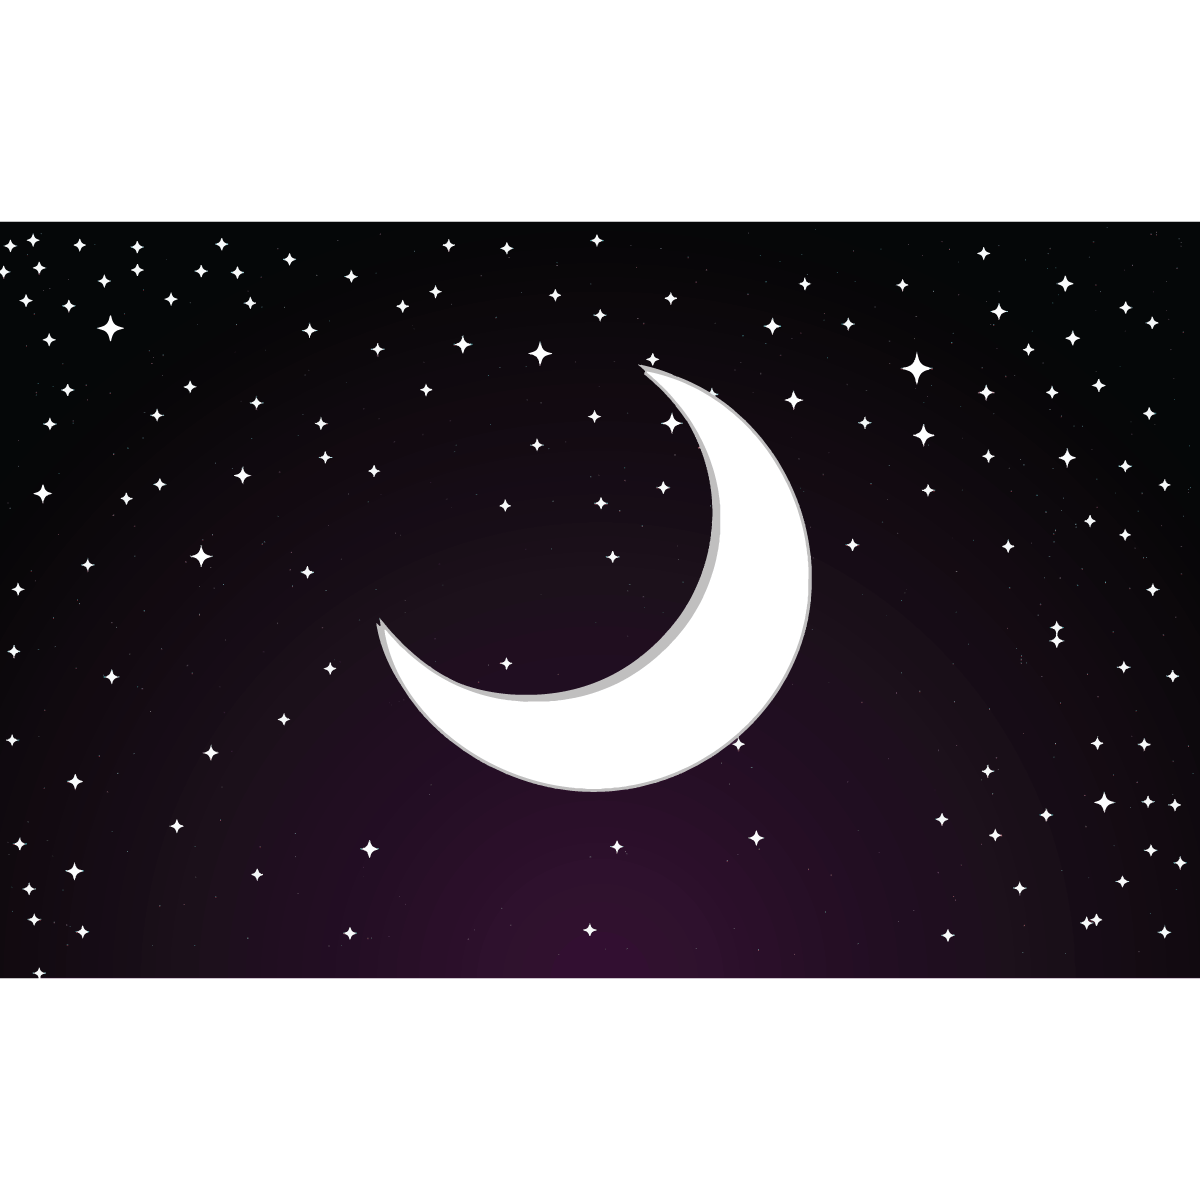 outer-space-galaxy-half-moon-and-stars background png transparent